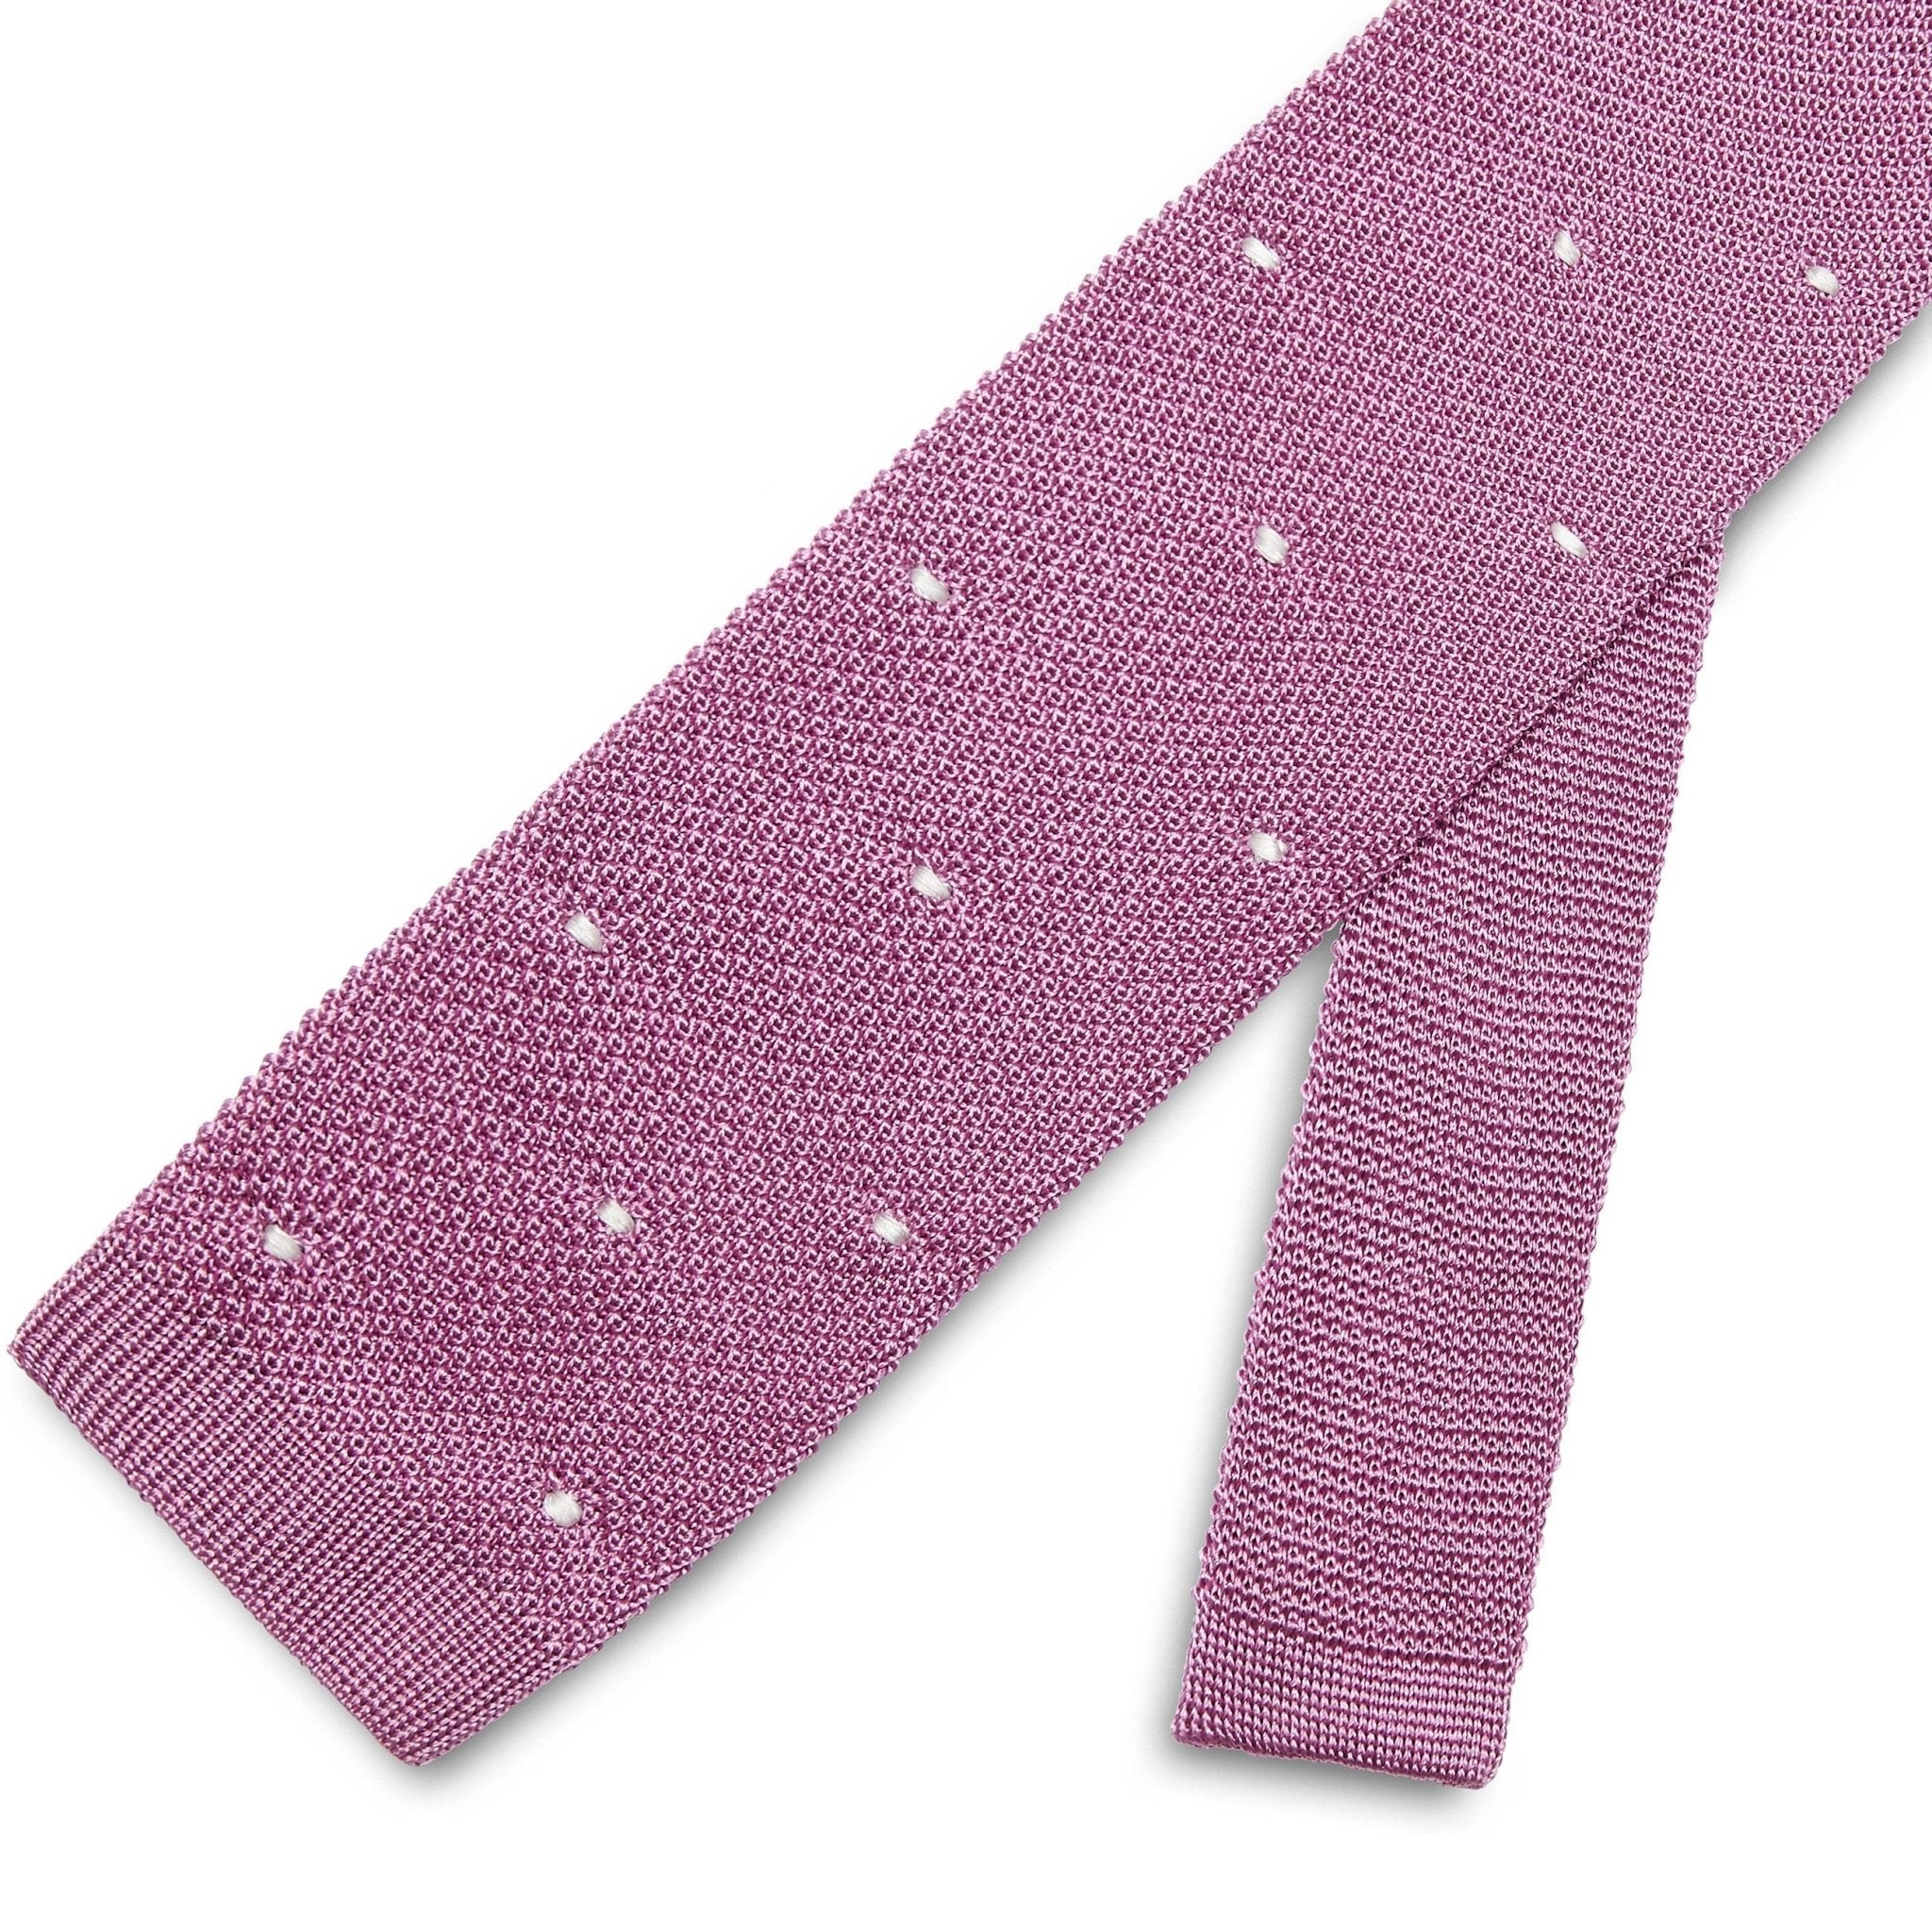 Rose Pink Knitted Silk Tie with White Spots